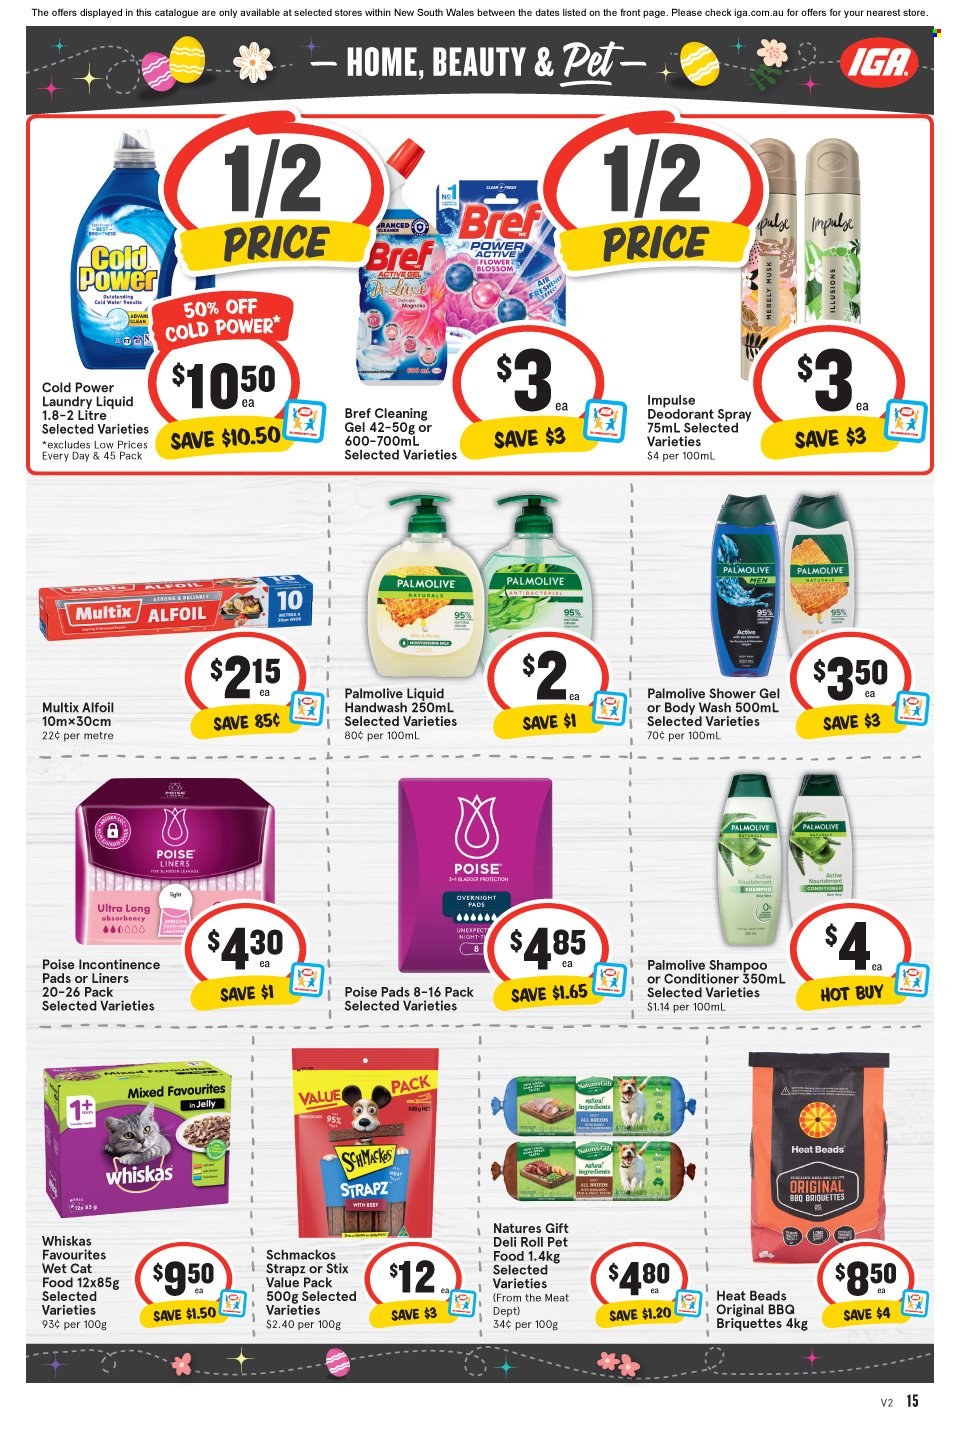 thumbnail - IGA Catalogue - 29 Mar 2023 - 4 Apr 2023 - Sales products - Blossom, water, cleaner, Bref Power, laundry detergent, body wash, shampoo, shower gel, hand wash, Palmolive, sanitary pads, conditioner, anti-perspirant, deodorant, animal food, animal treats, cat food, Whiskas, Strapz, Schmackos, wet cat food. Page 11.